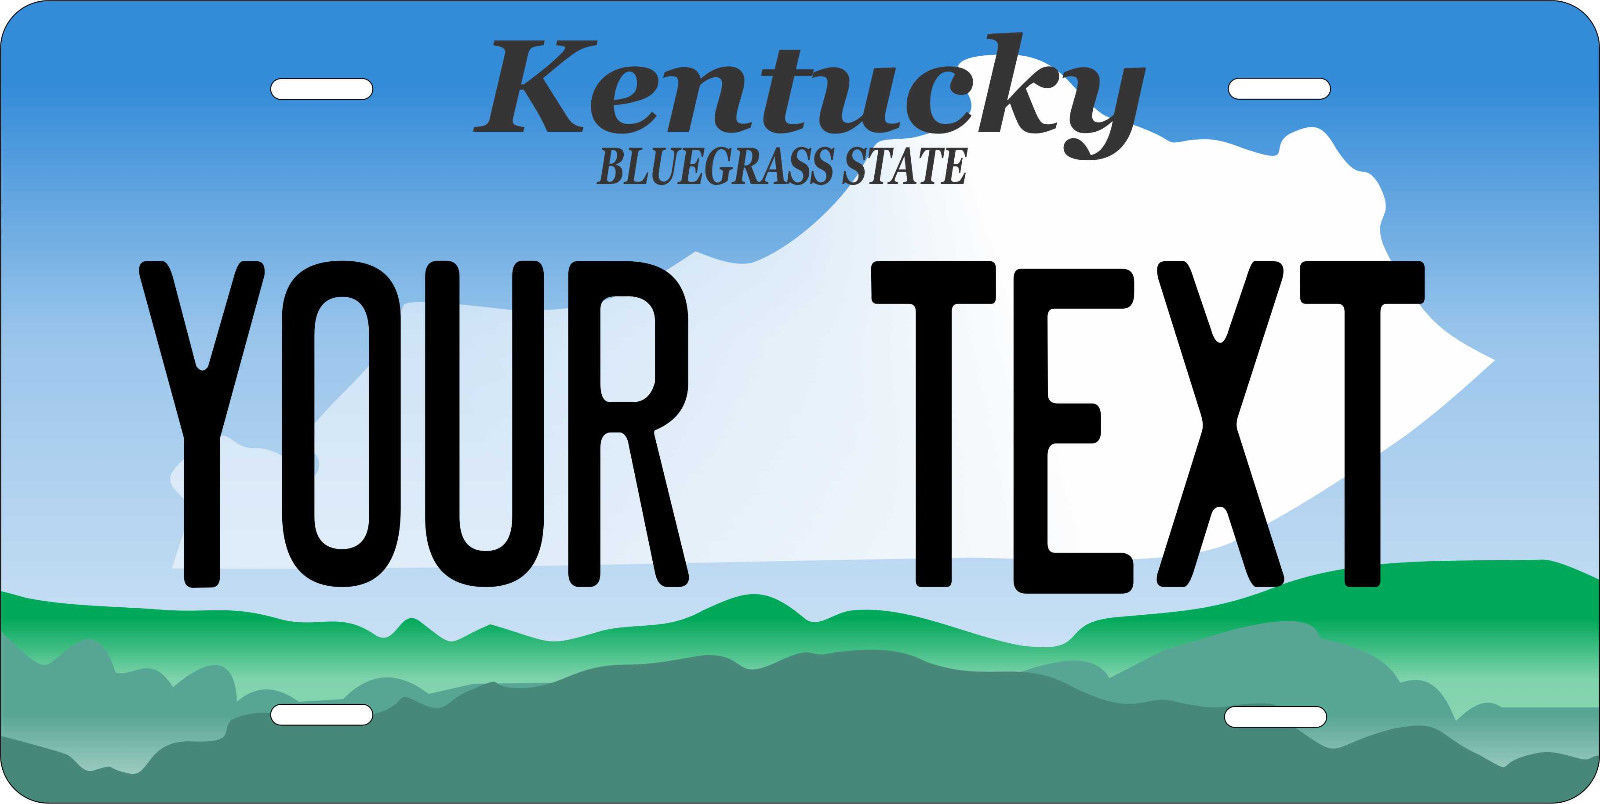 Kentucky 1999-02 License Plate Personalized Custom Auto Bike Motorcycle Moped - $10.99 - $18.22